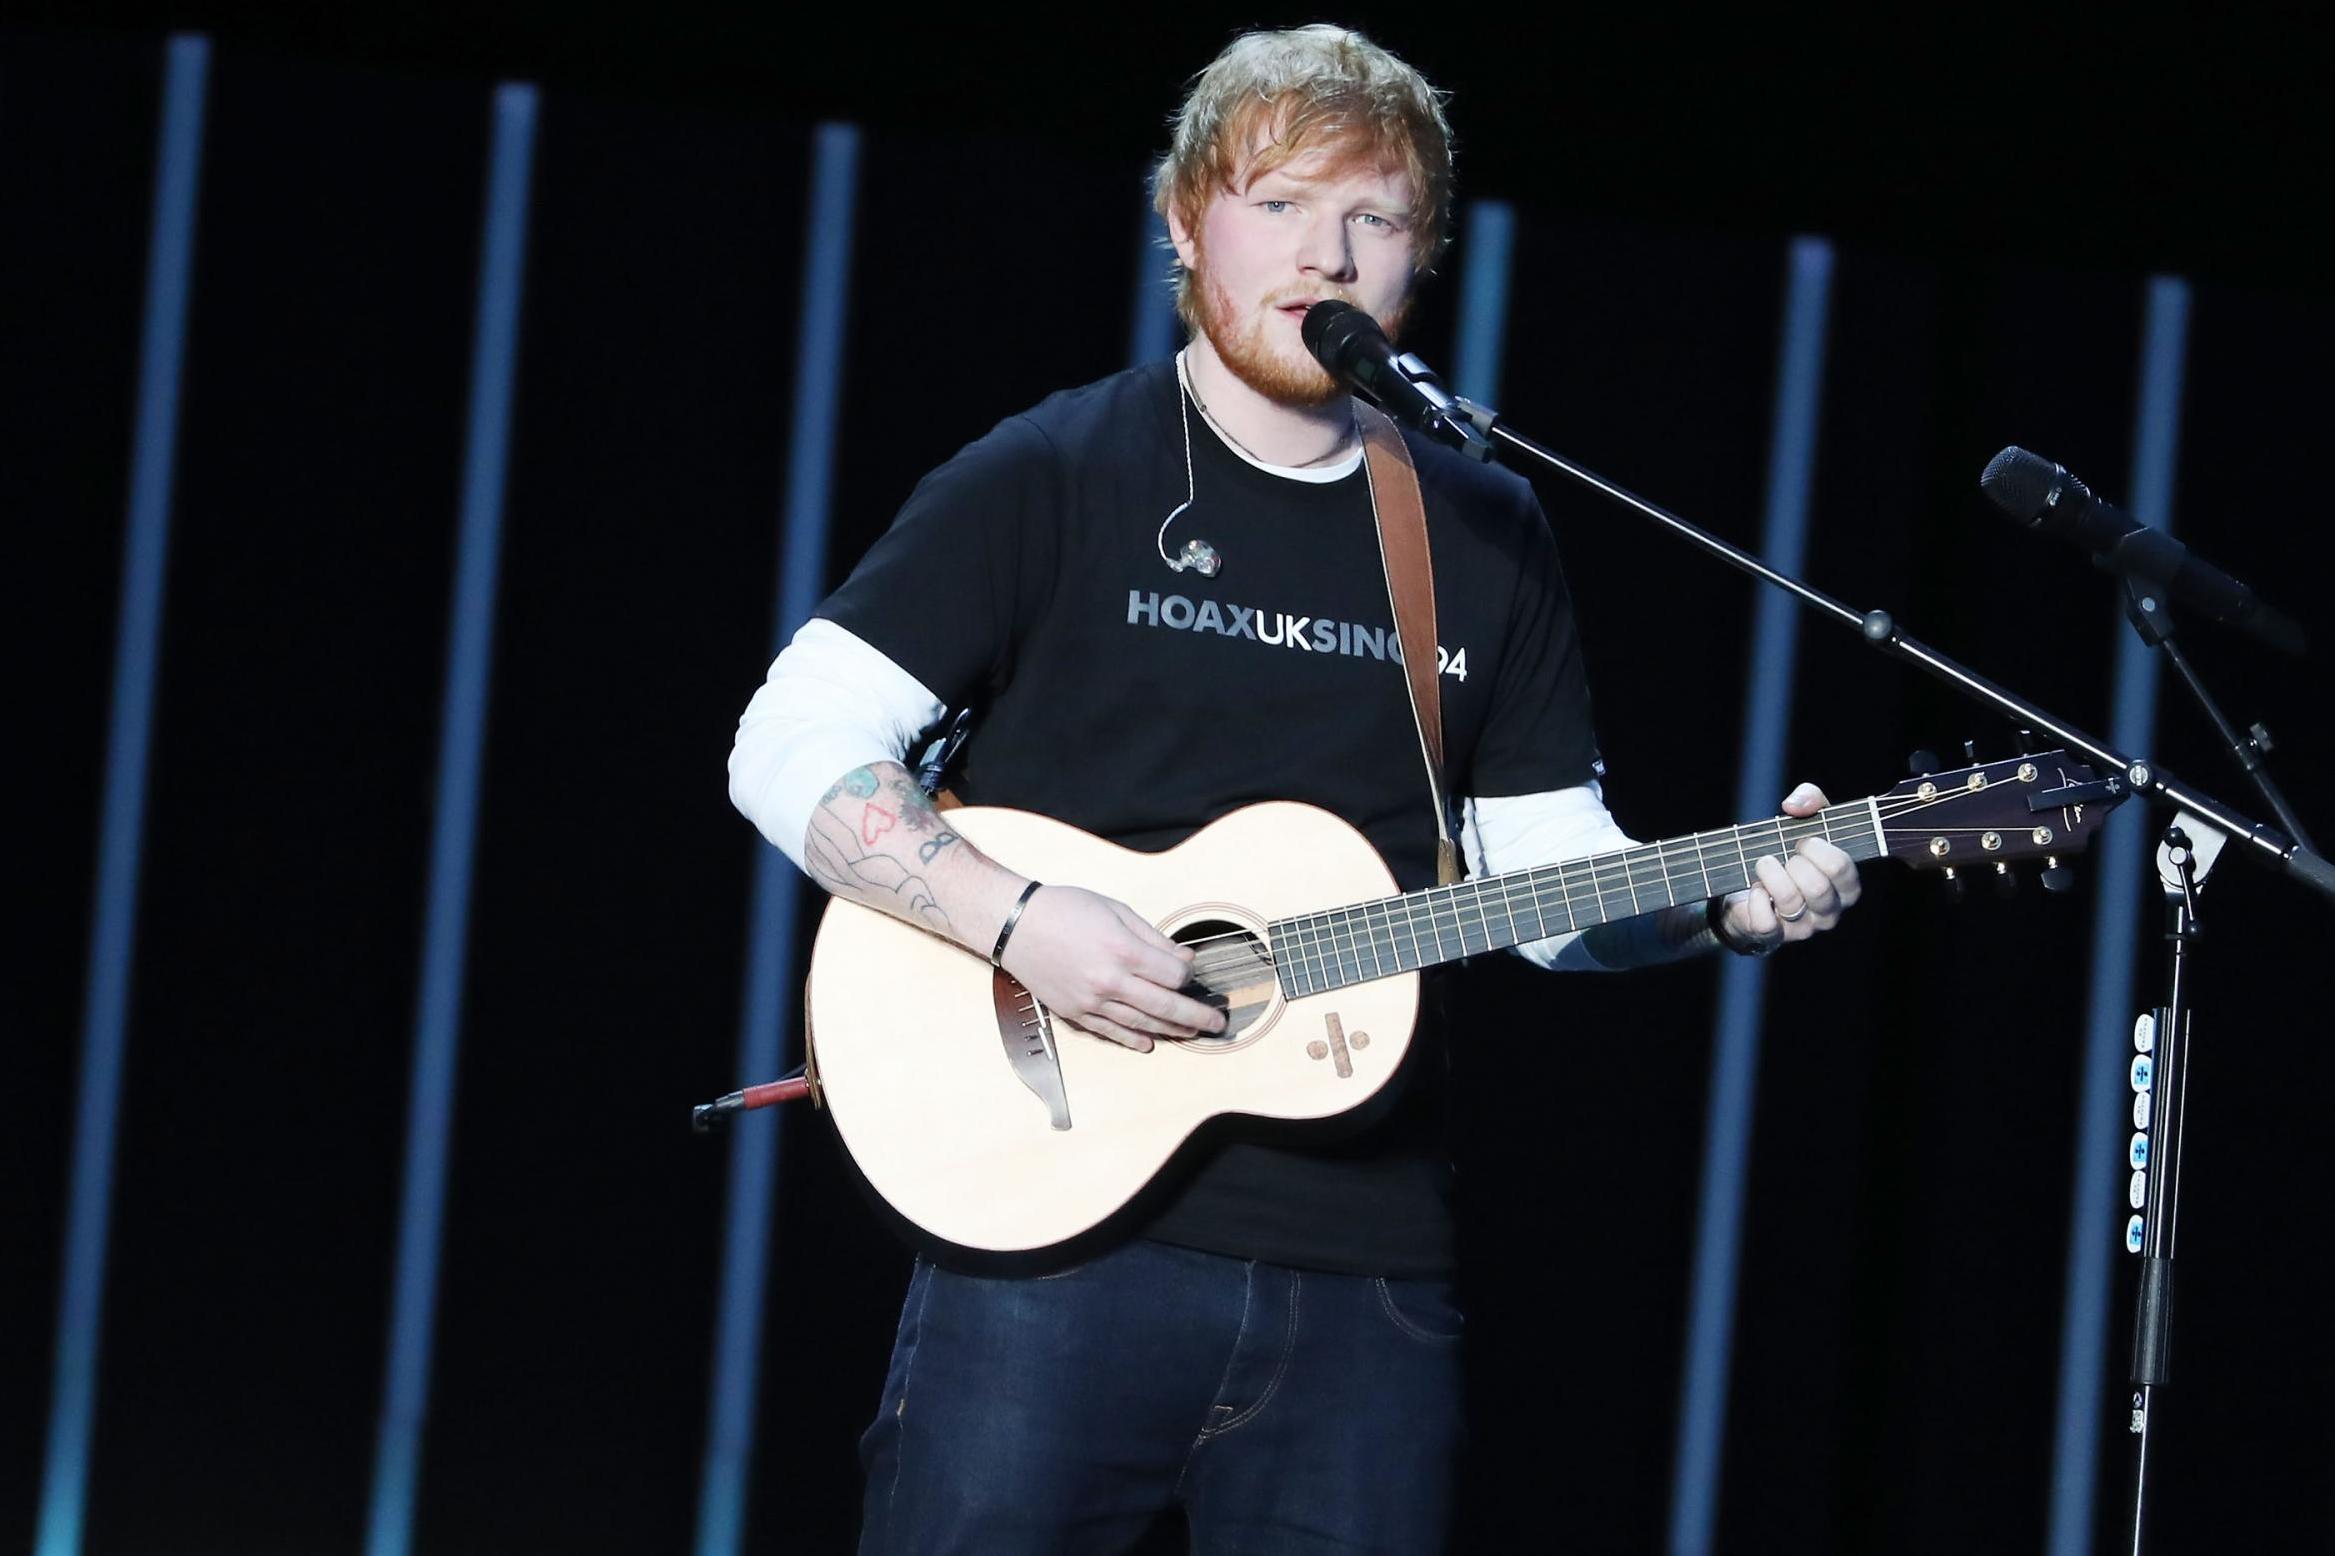 Sheeran　The　The　and　announces　with　album　release　Ed　Independent　Independent　new　Chance　the　date　collaboration　Rapper